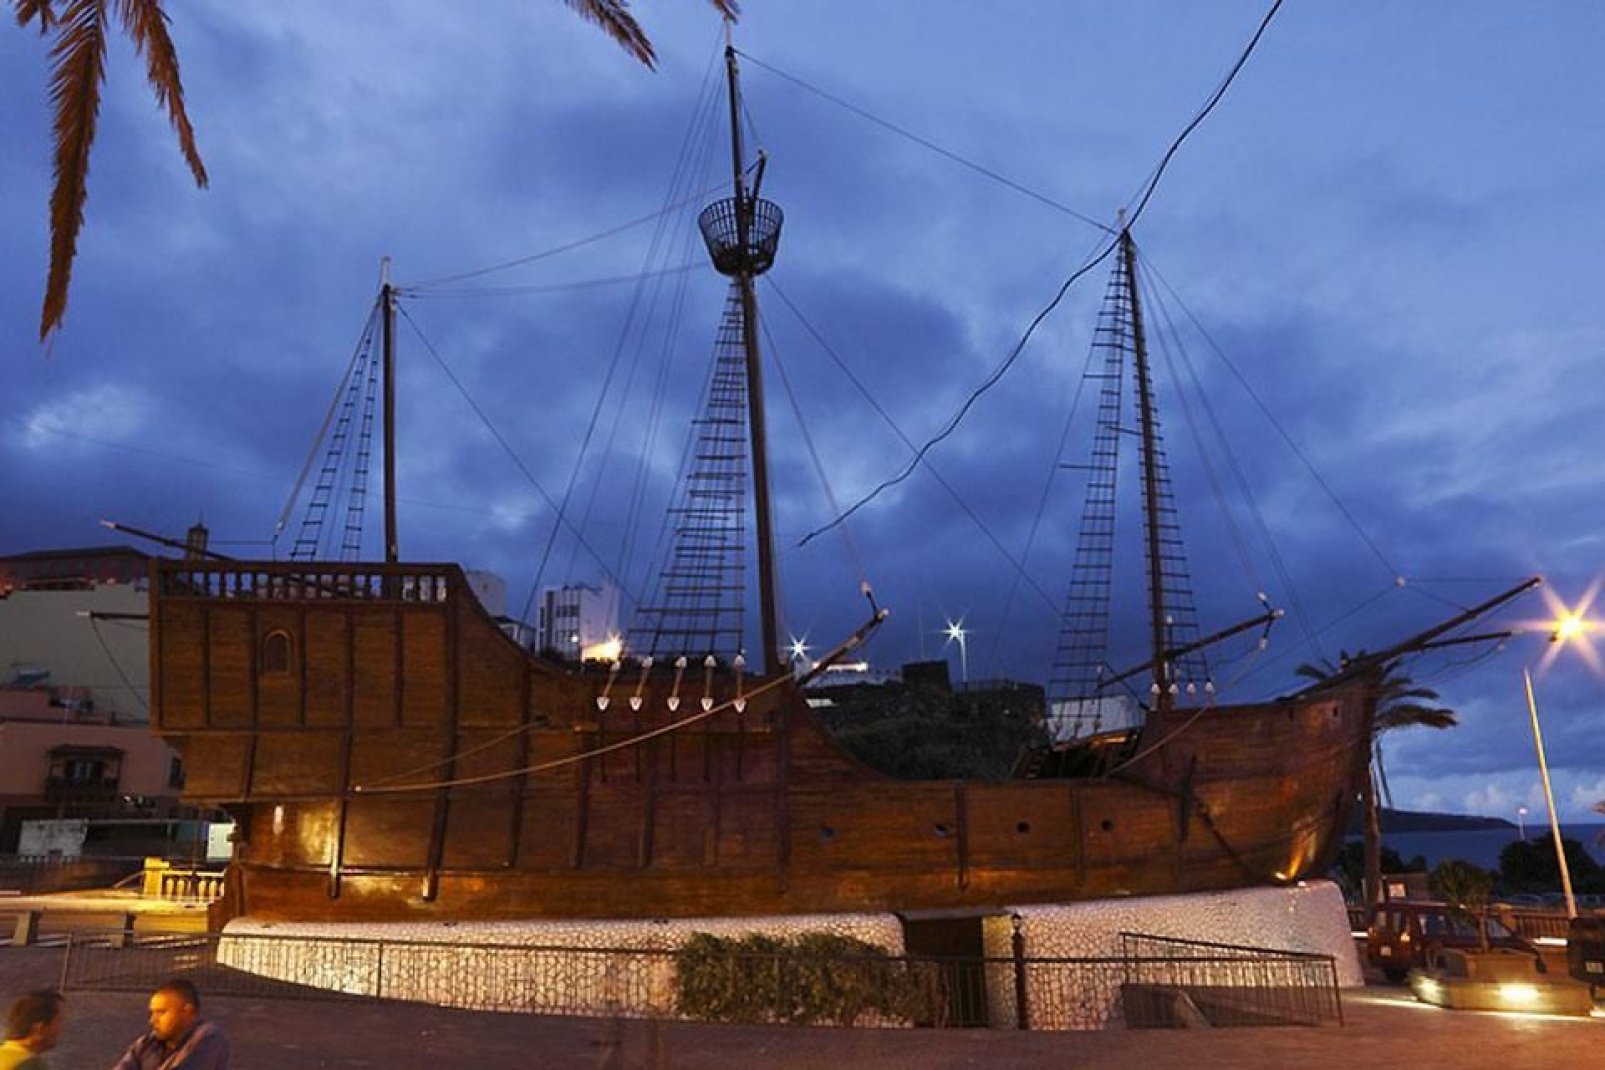 An identical reconstruction of one of Christopher Columbus' three caravels.